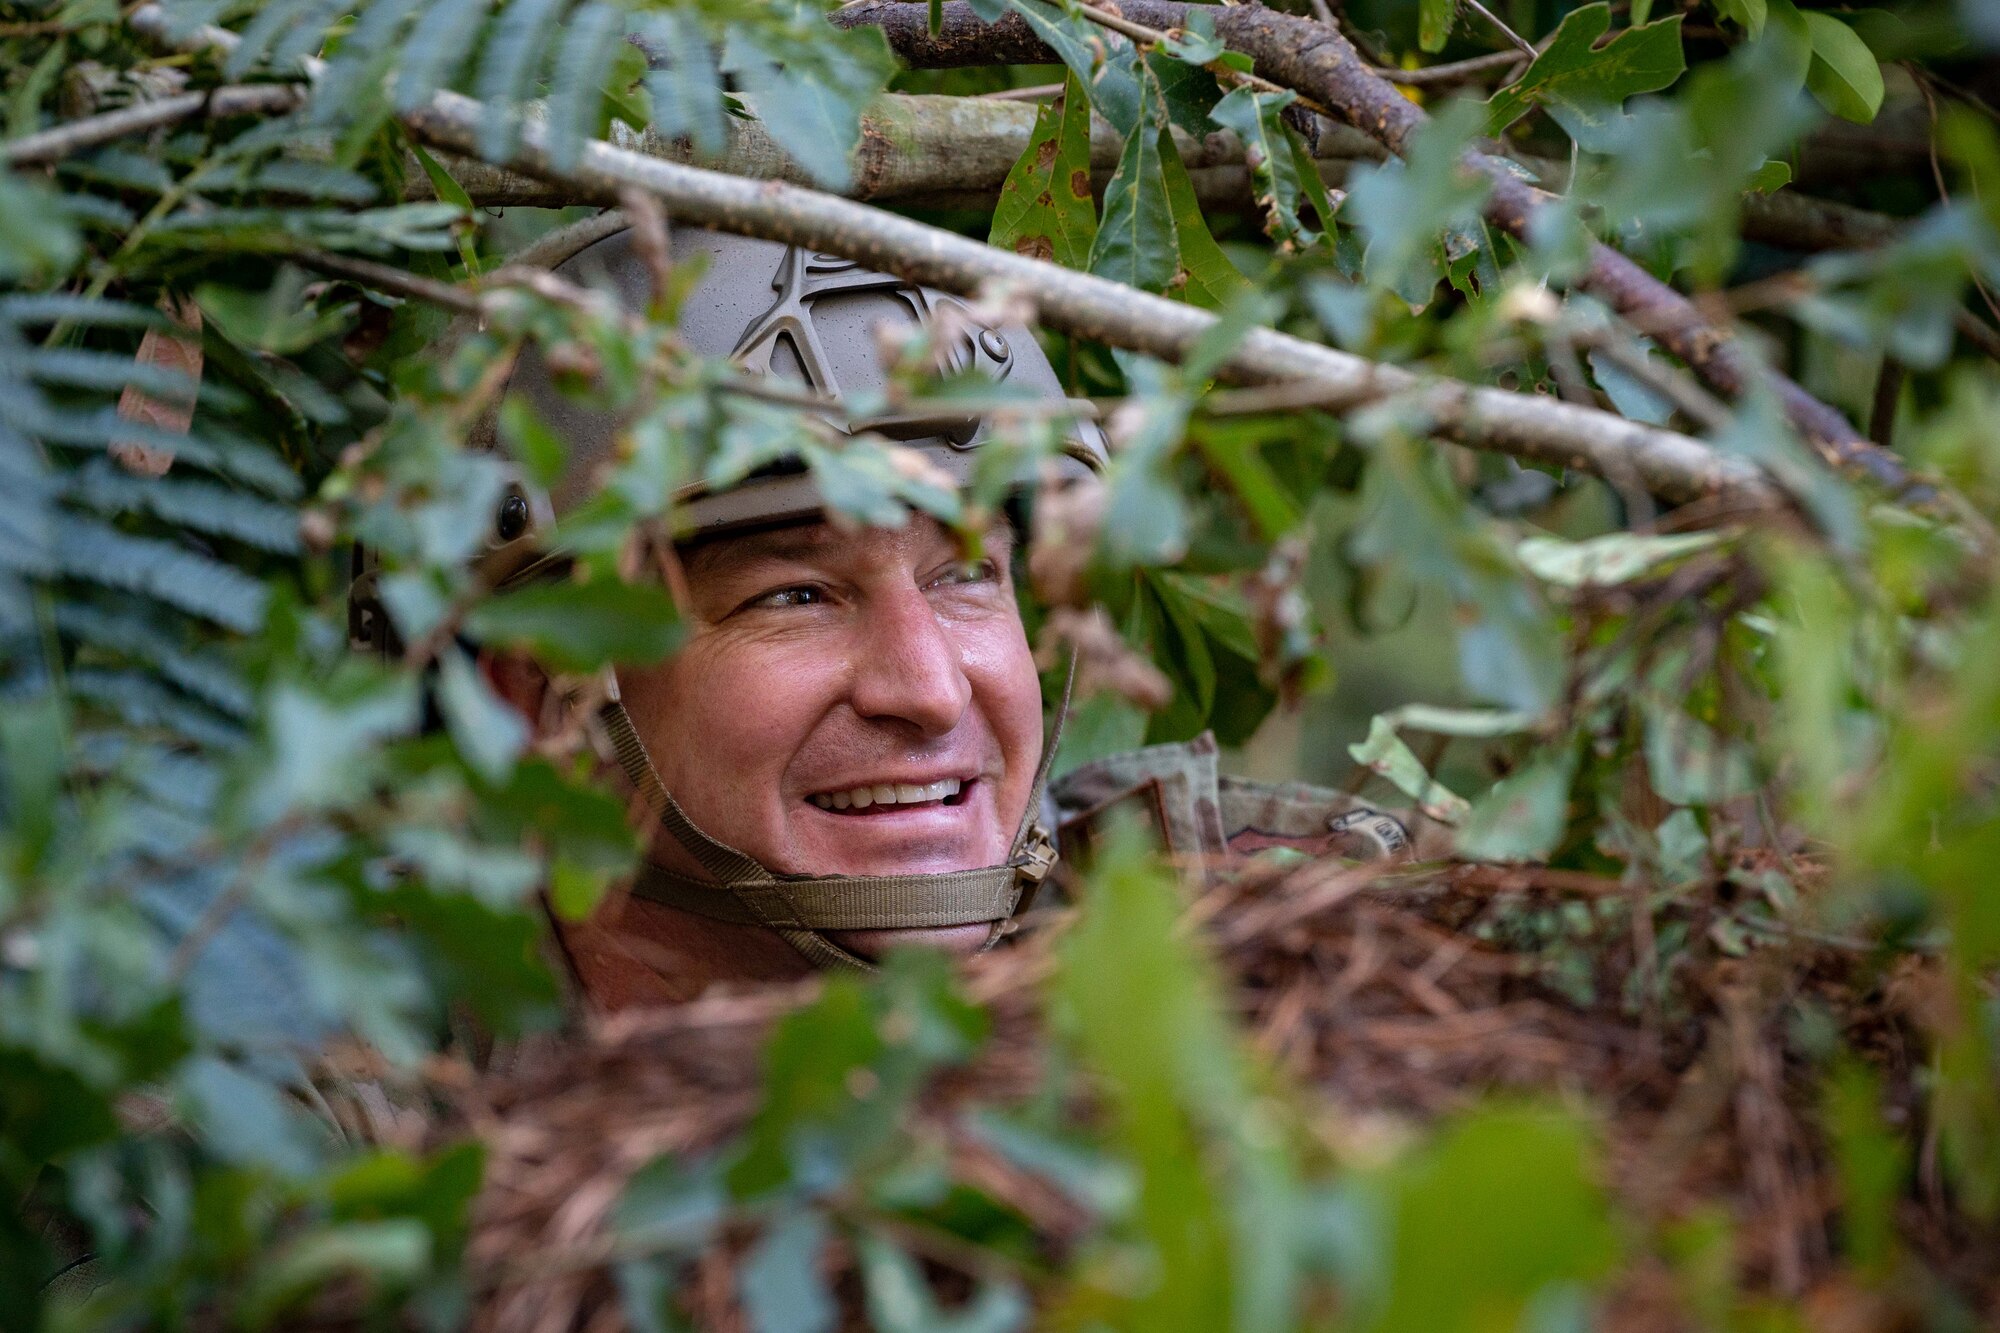 An Airman looks through foliage as he constructs a defensive fighting position.